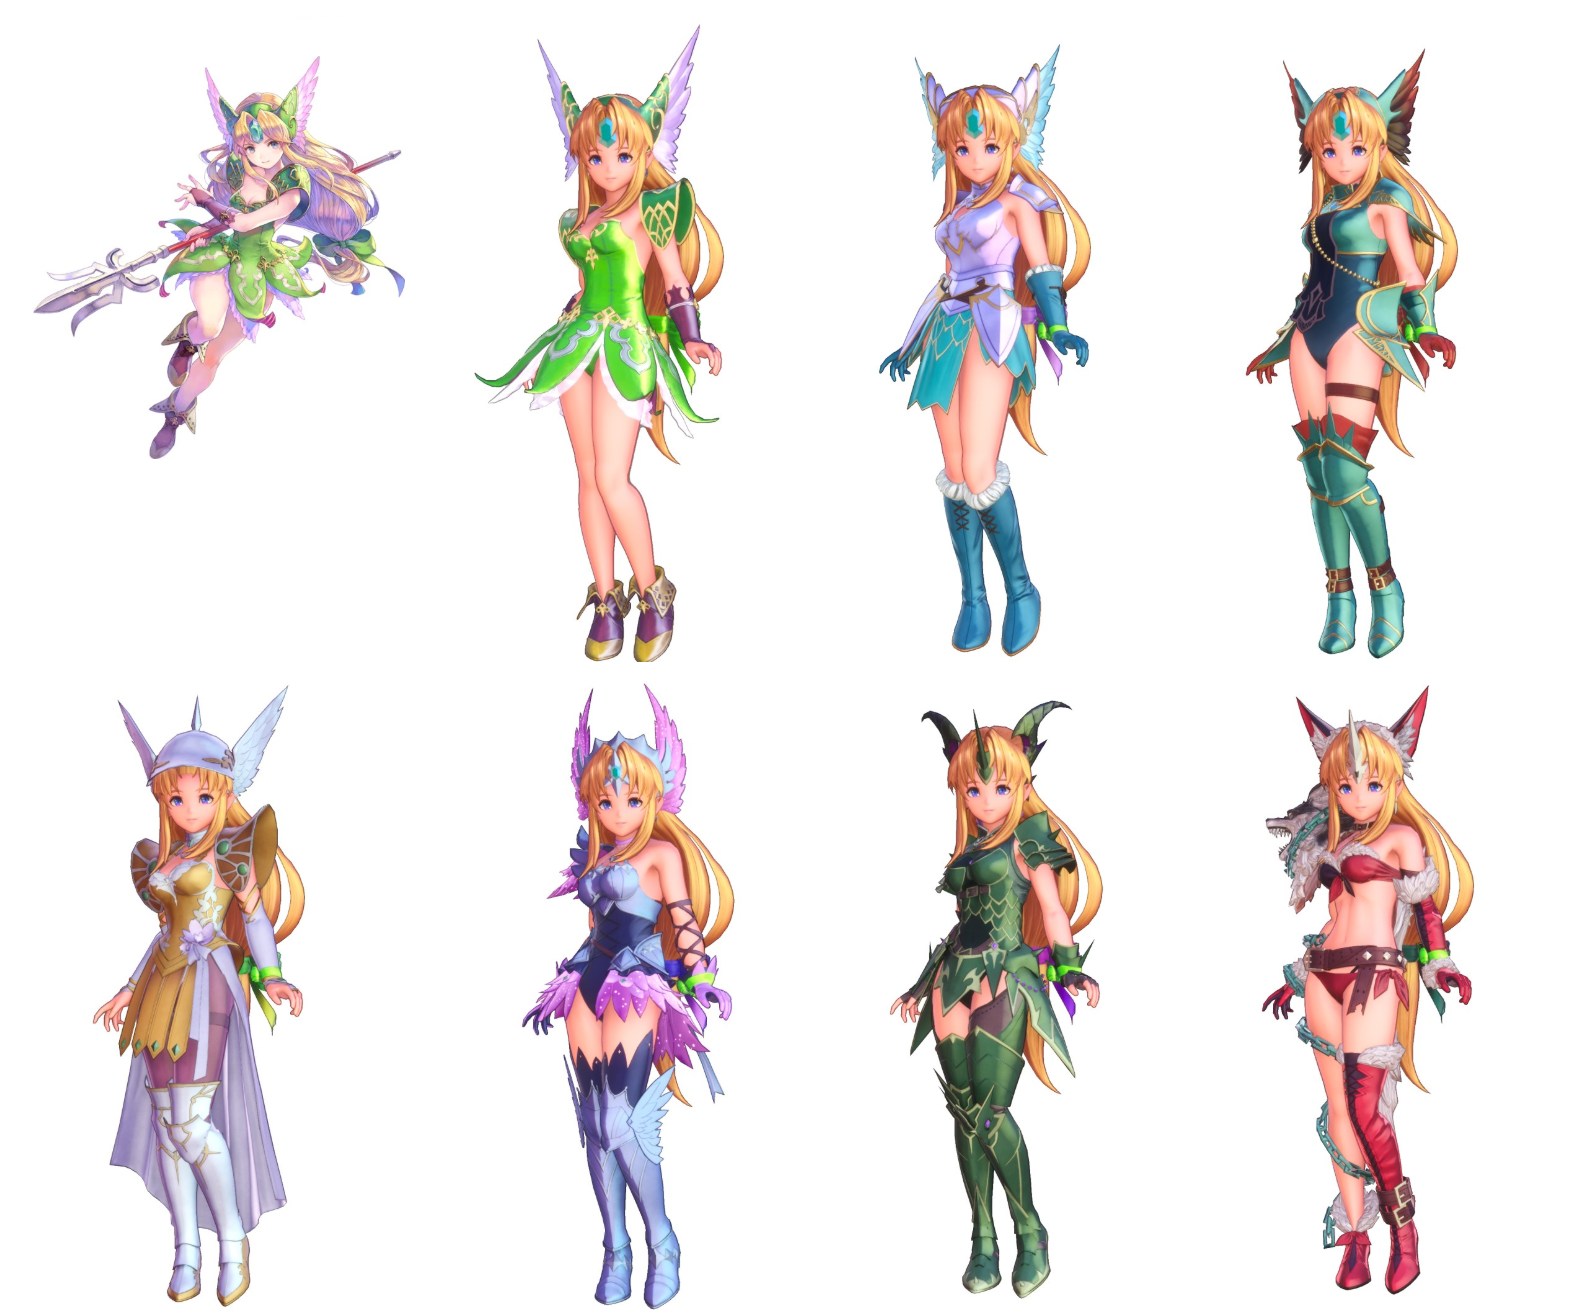 trials of mana character selection